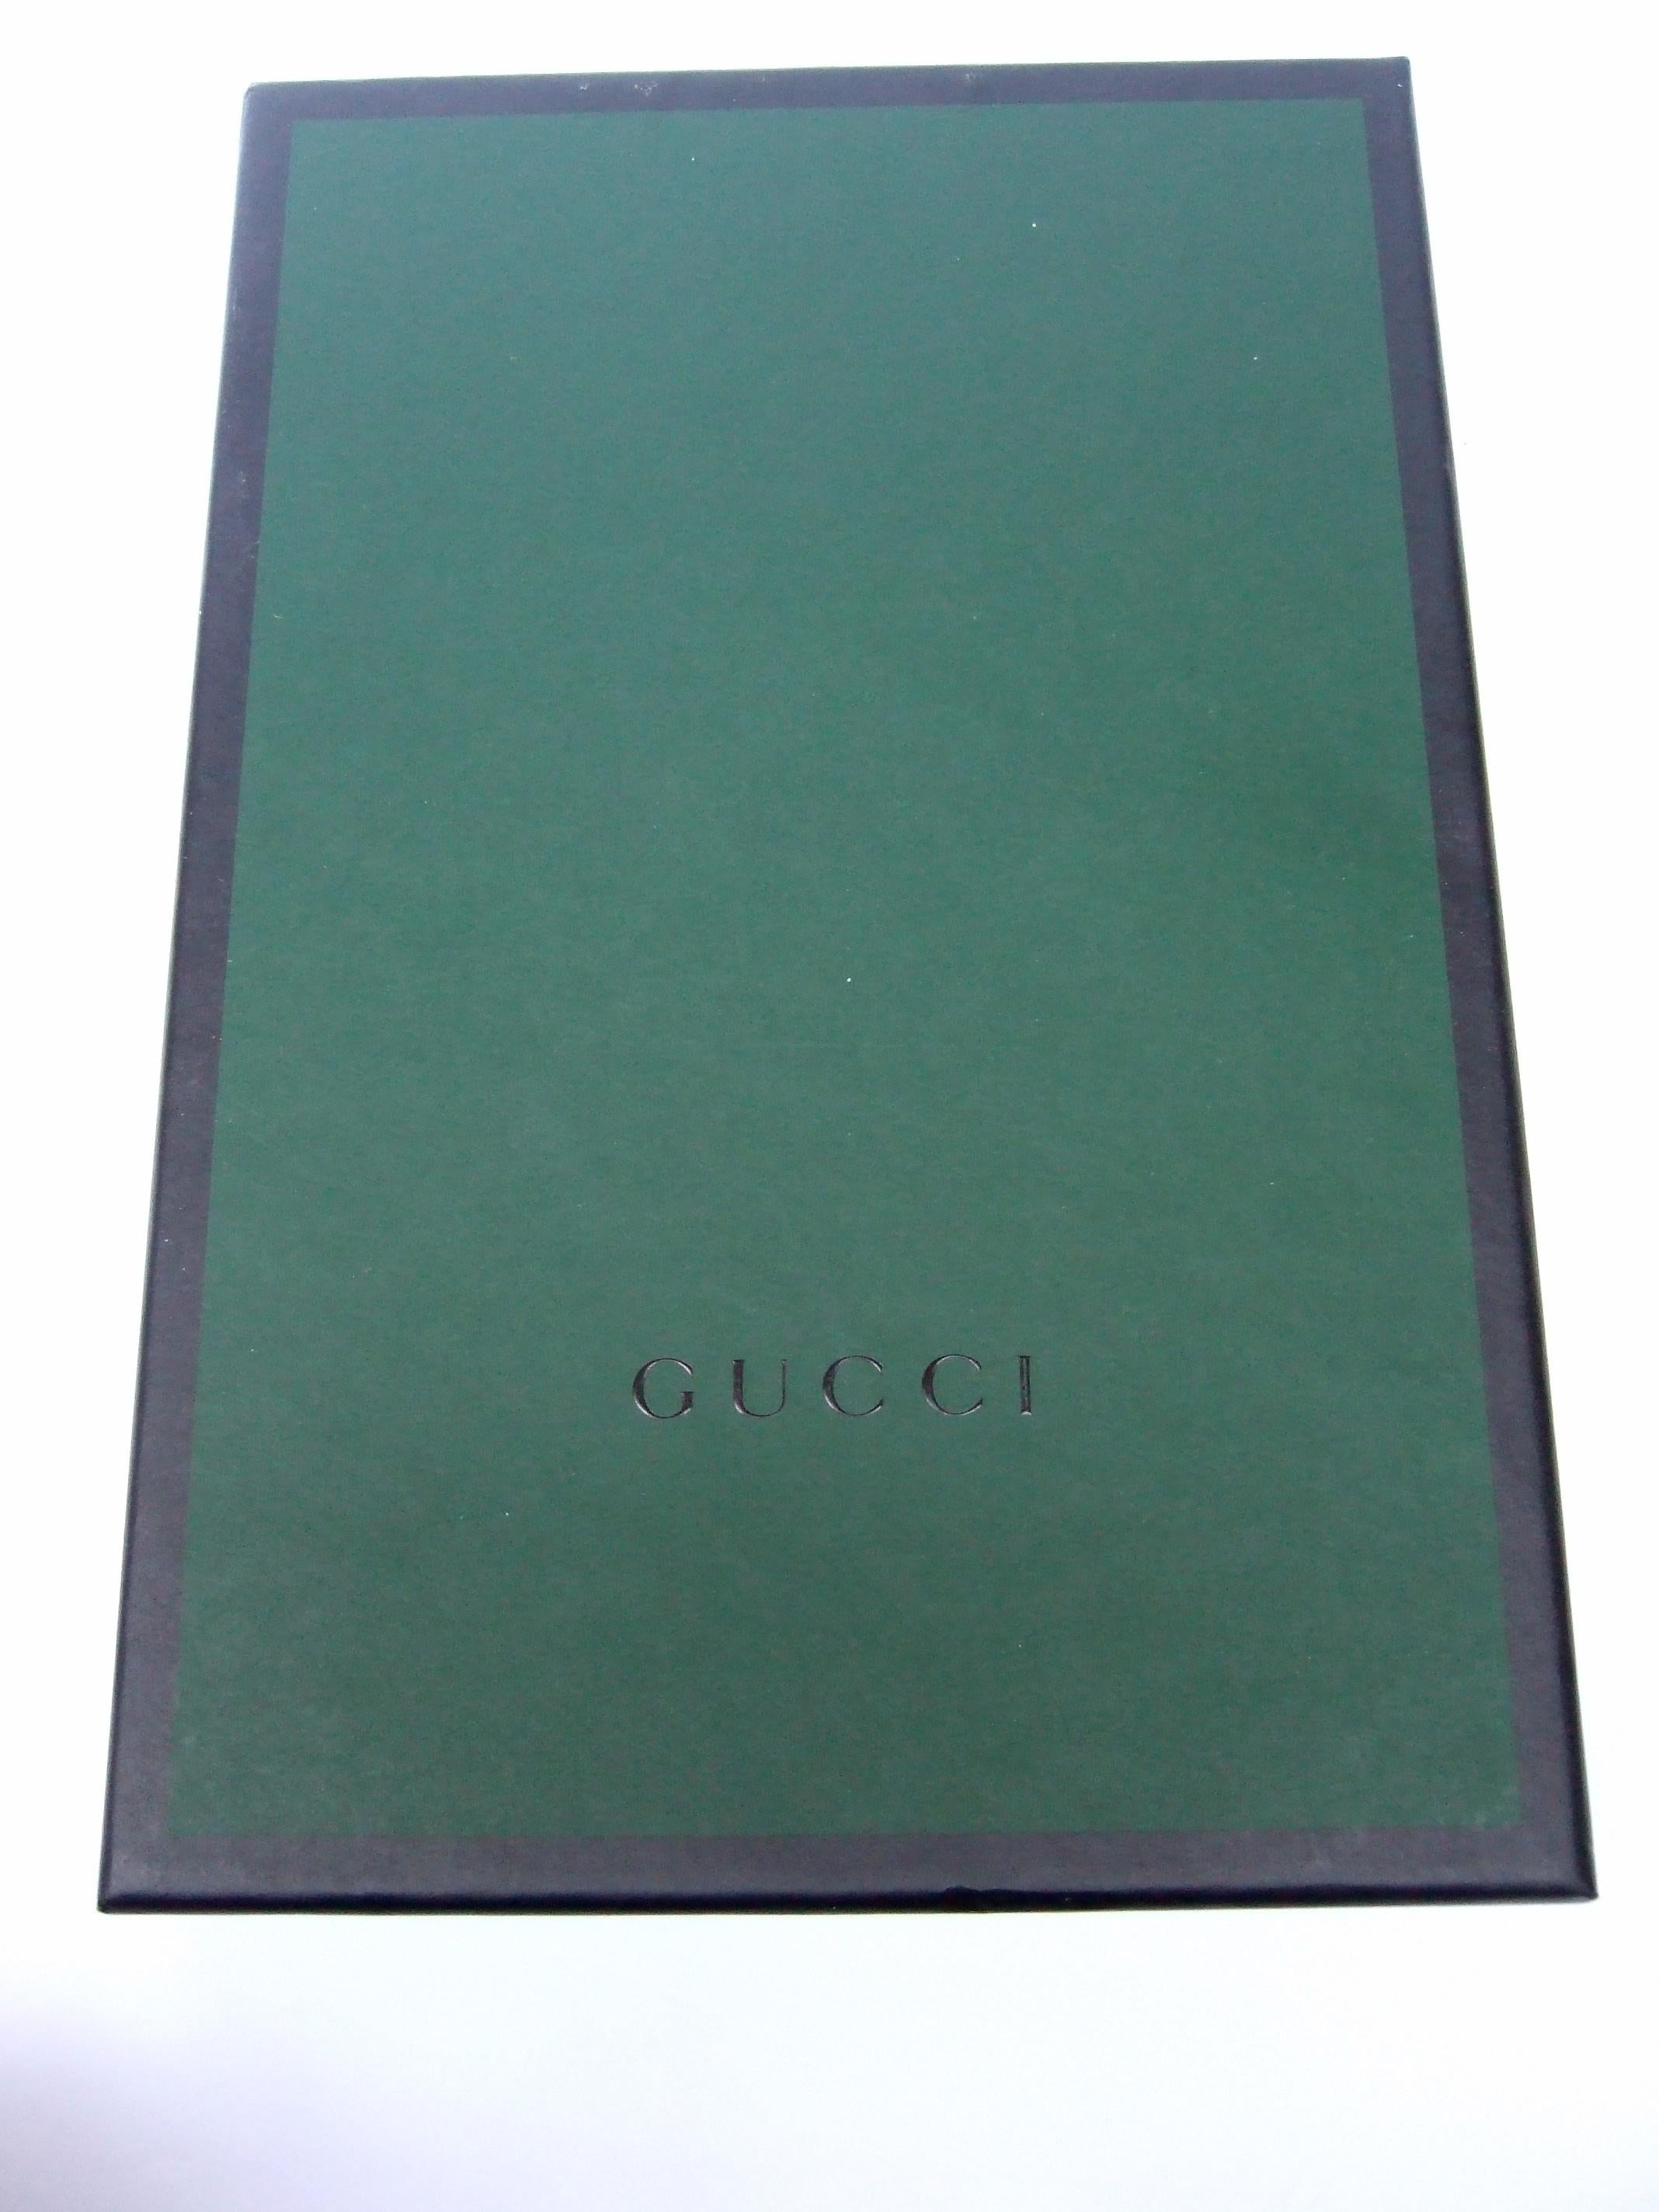 Gucci Equine Design Note Cards & Journal Book Stationery Set in Gucci Box c 1990 For Sale 3